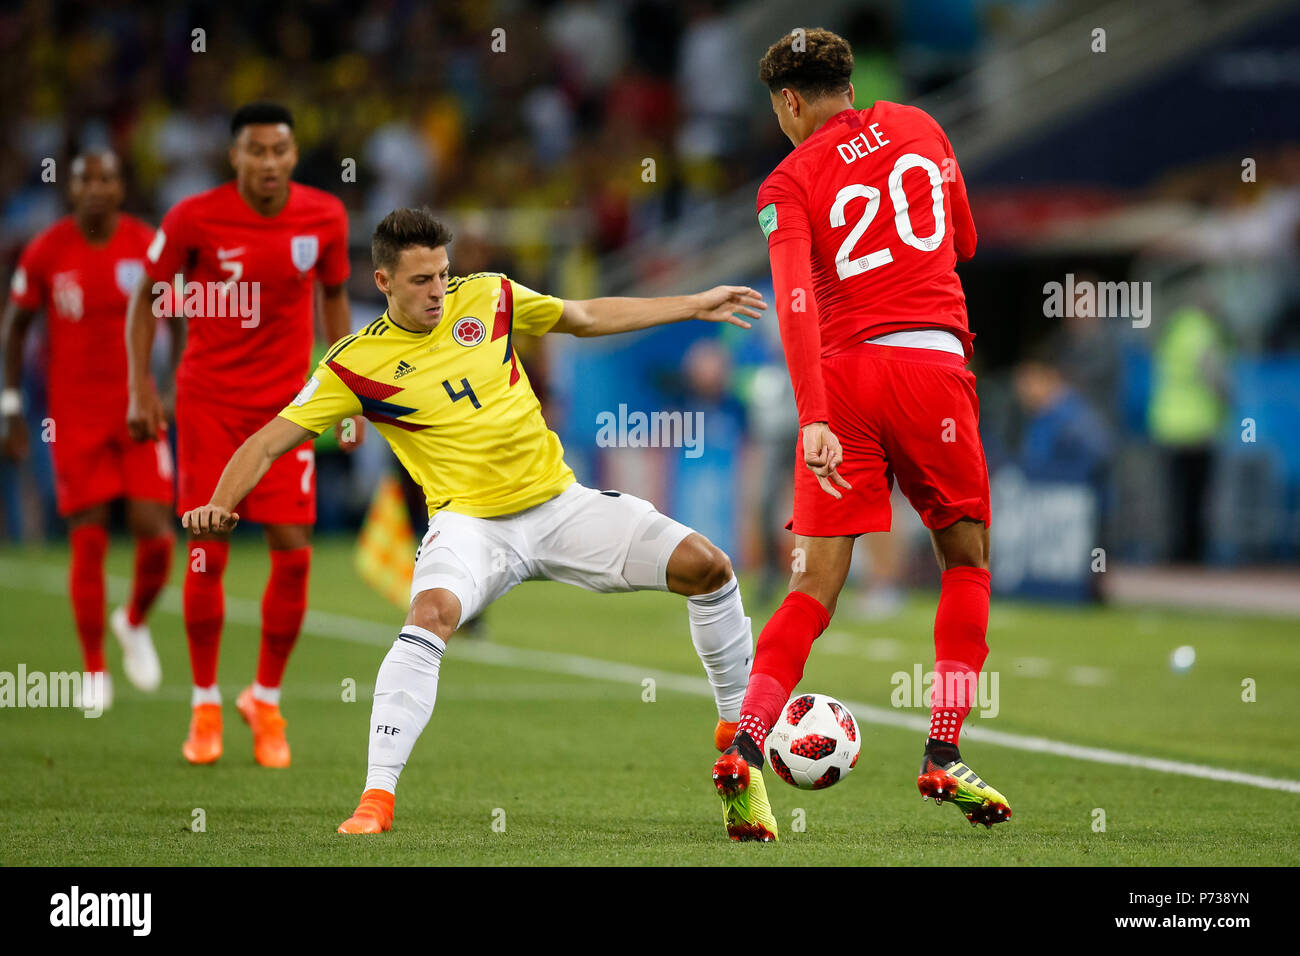 Moscow, Russia. 3th July 2018. Dele Alli of England is tackled by Santiago Arias of Colombia during the 2018 FIFA World Cup Round of 16 match between Colombia and England at Spartak Stadium on July 3rd 2018 in Moscow, Russia. Credit: PHC Images/Alamy Live News Stock Photo